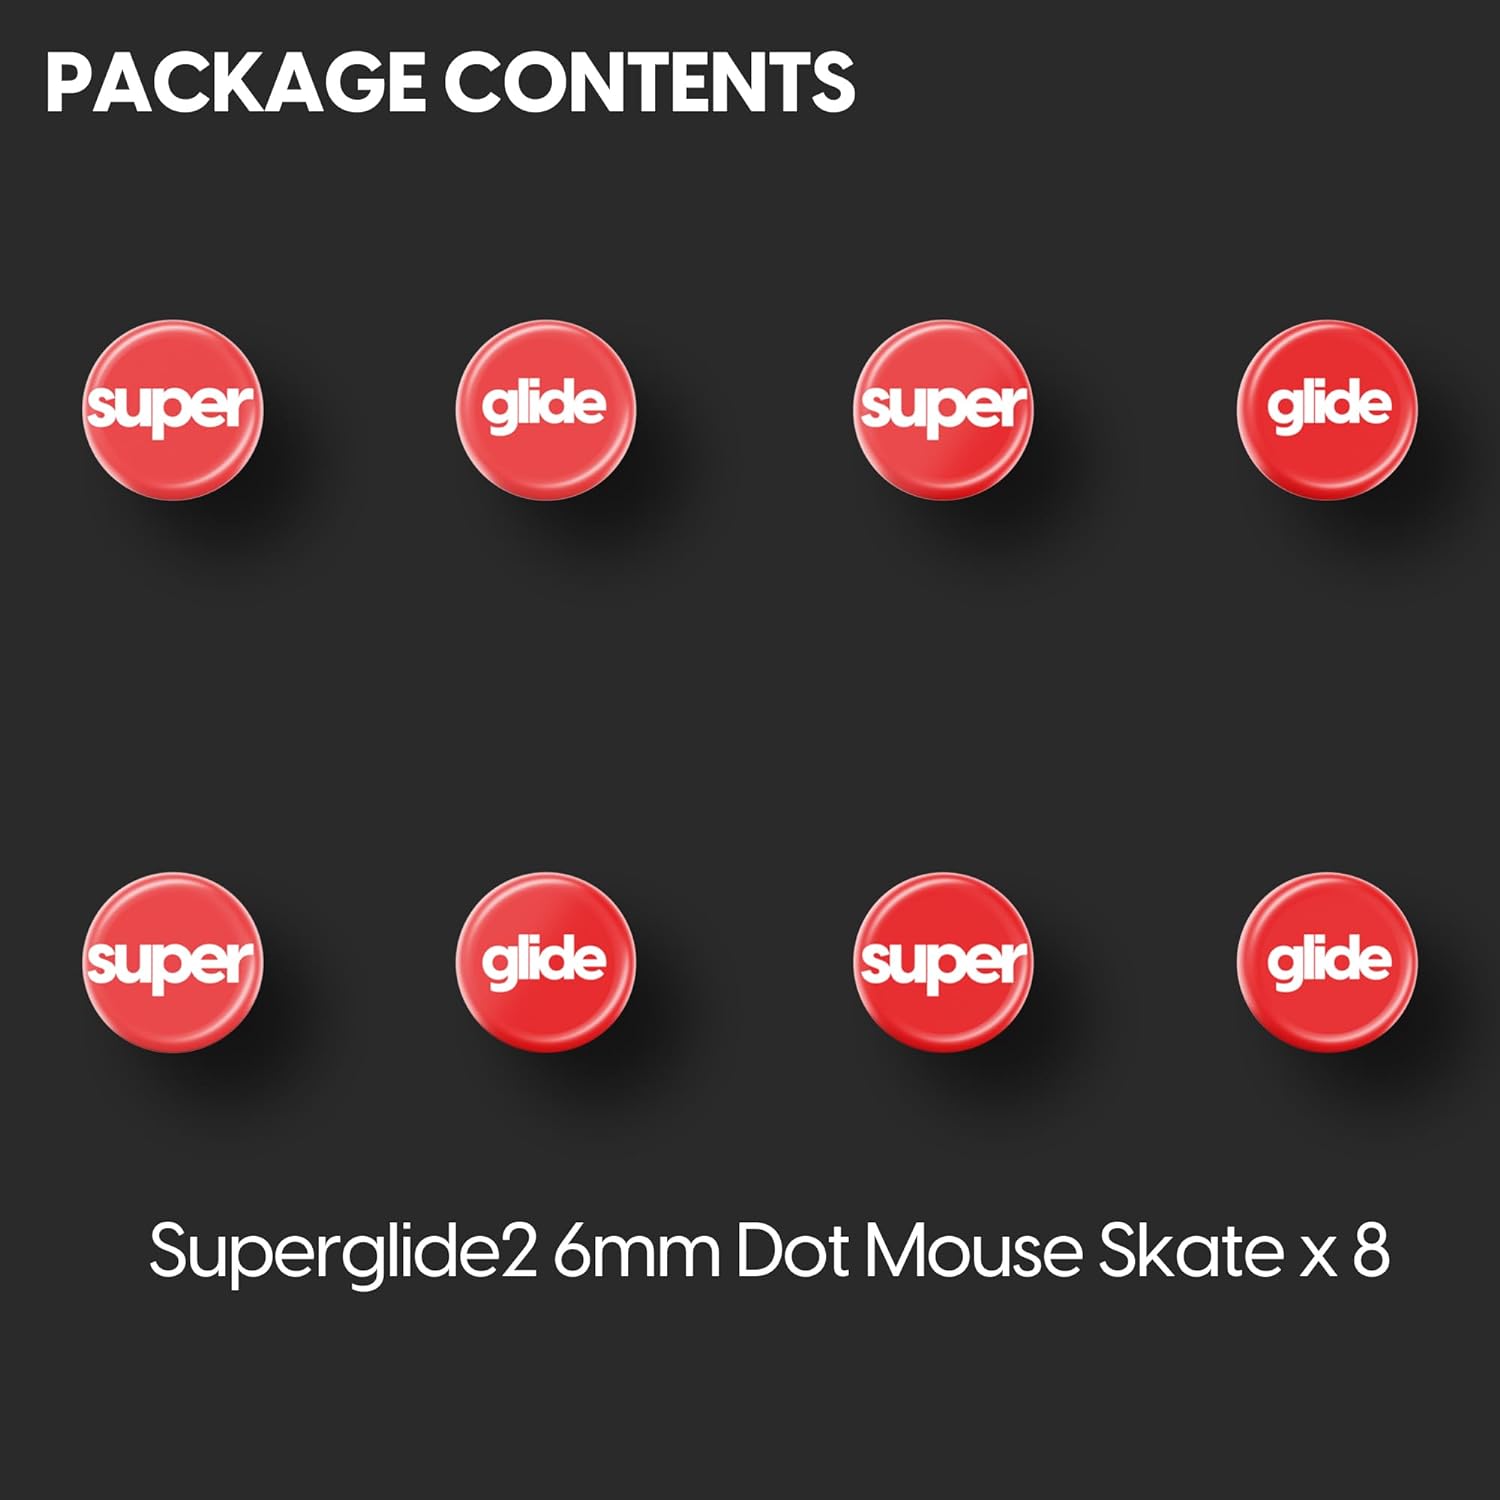 A large marketing image providing additional information about the product Pulsar Superglide 2 Dot Skates for Universal 6mm x 8 - Red - Additional alt info not provided